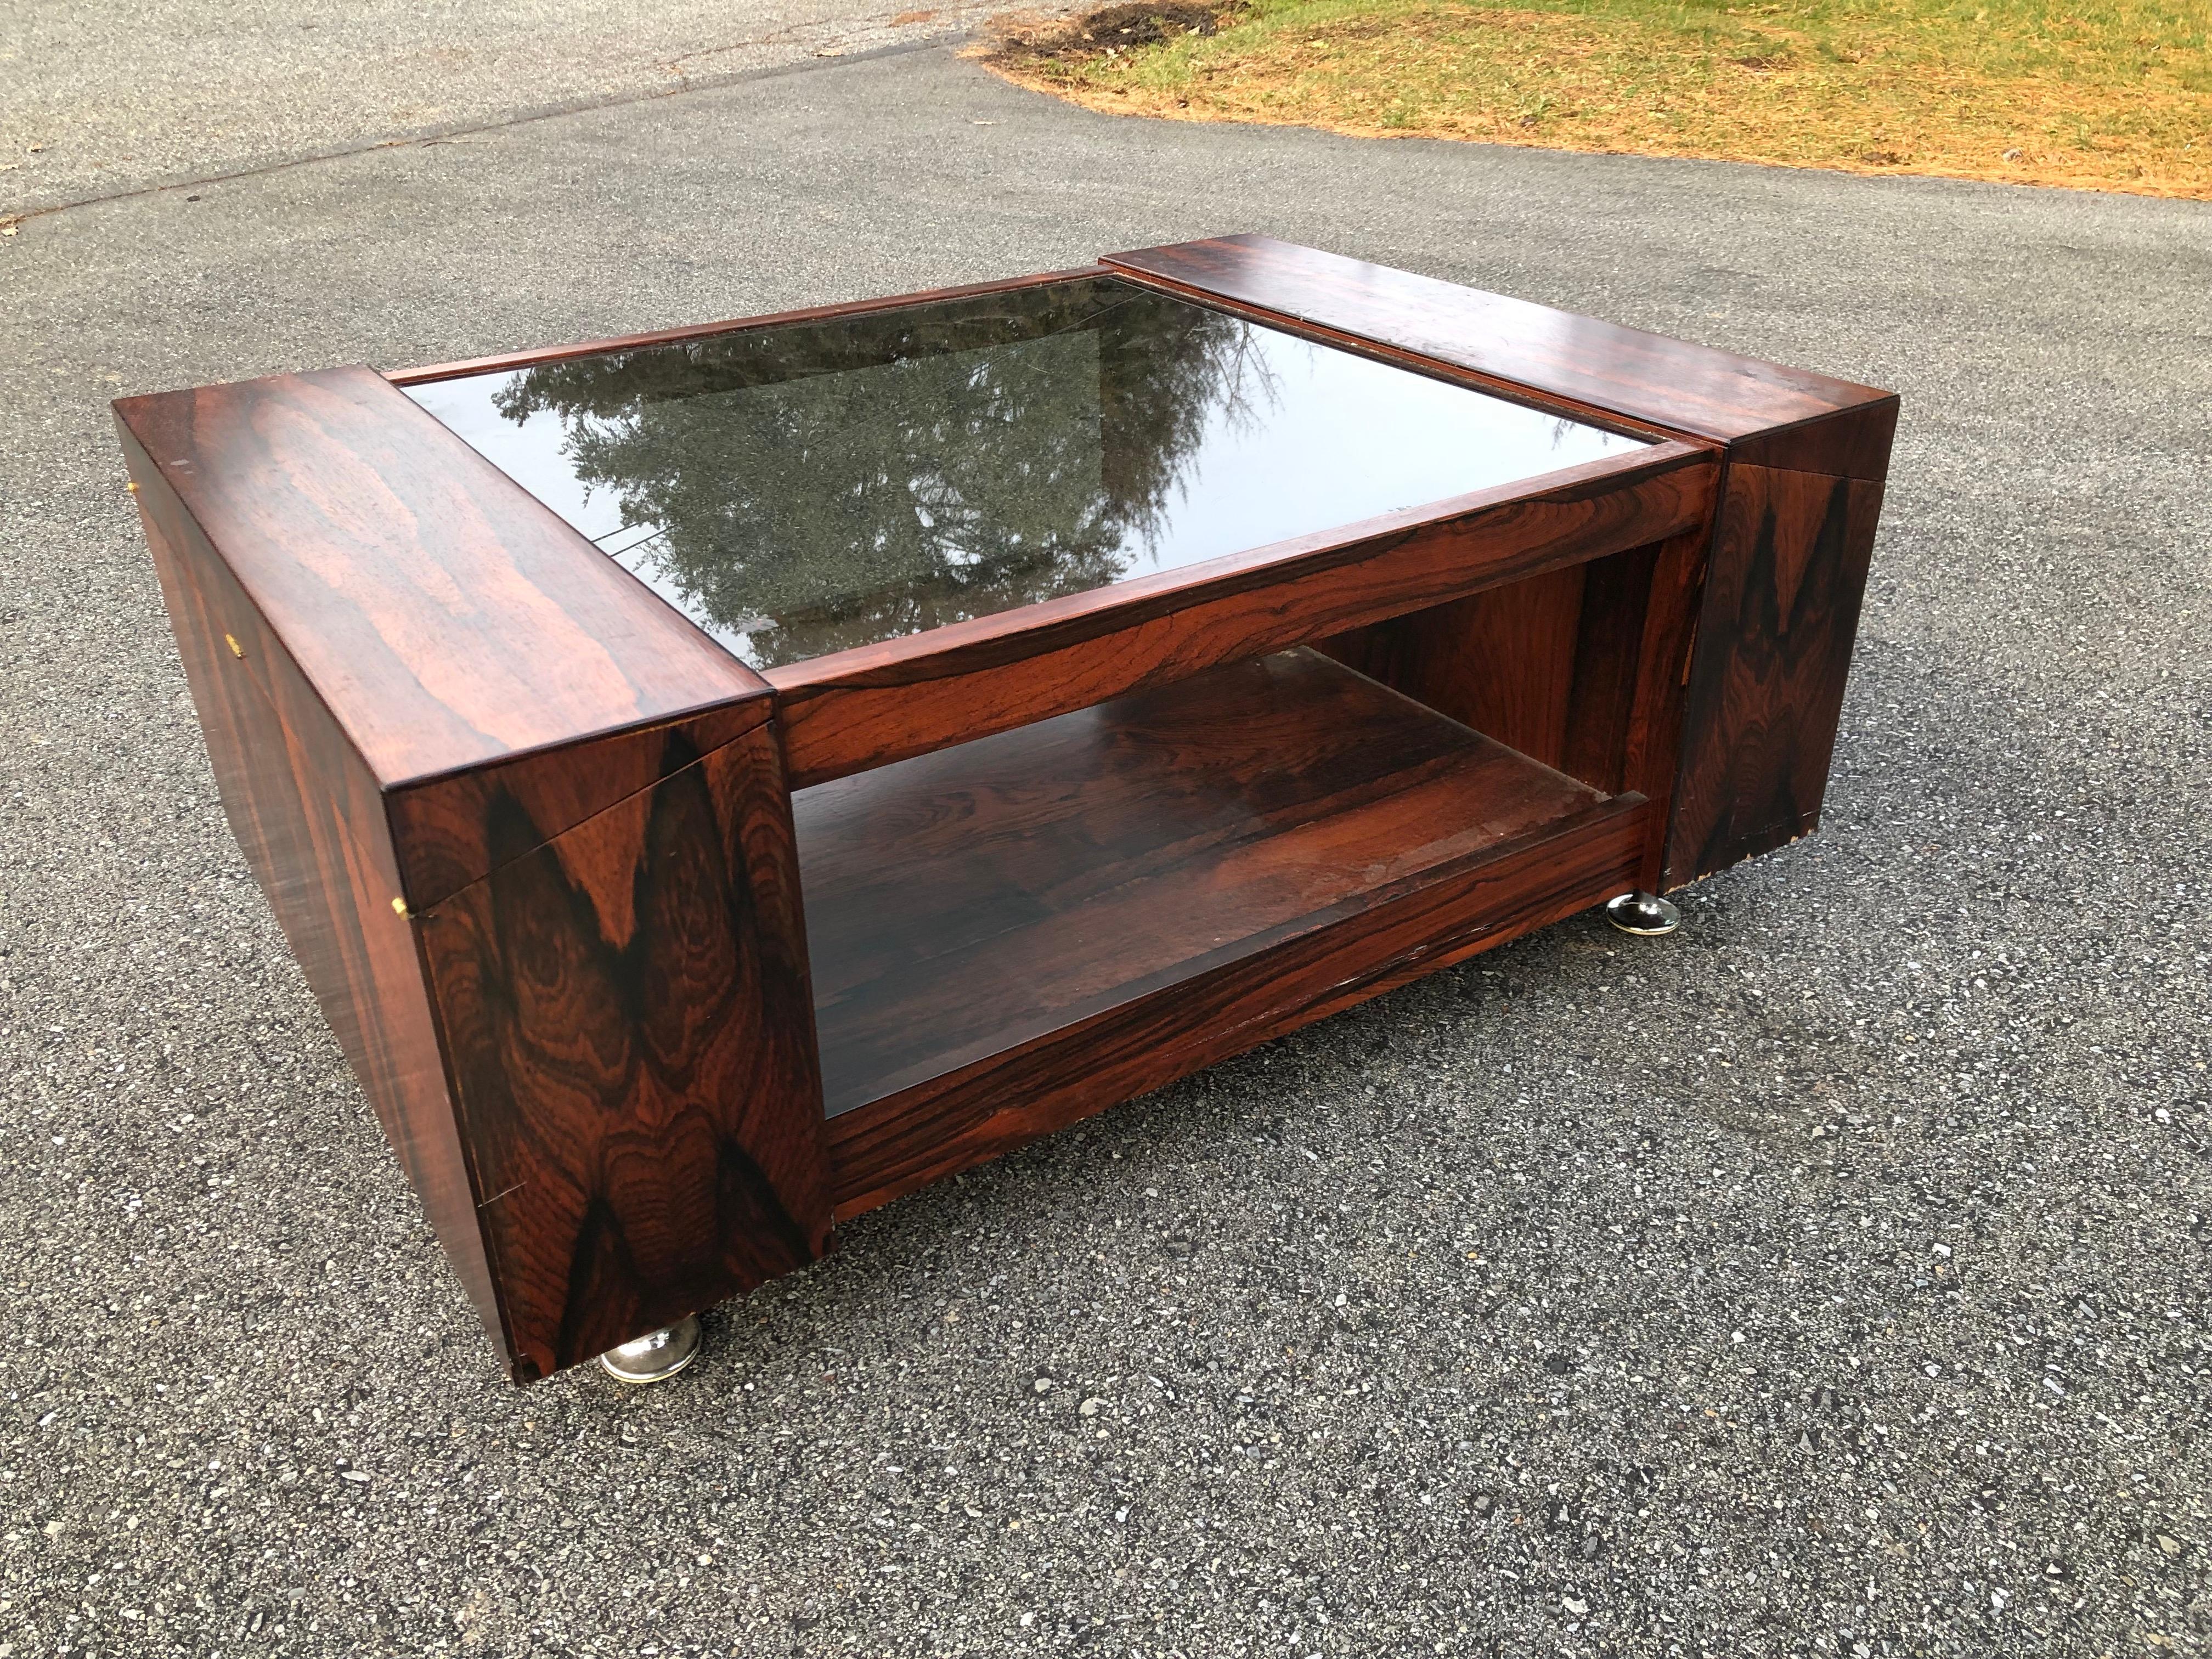 Brazilian Rosewood Coffee Table by Leif Alring (Norwegisch) im Angebot